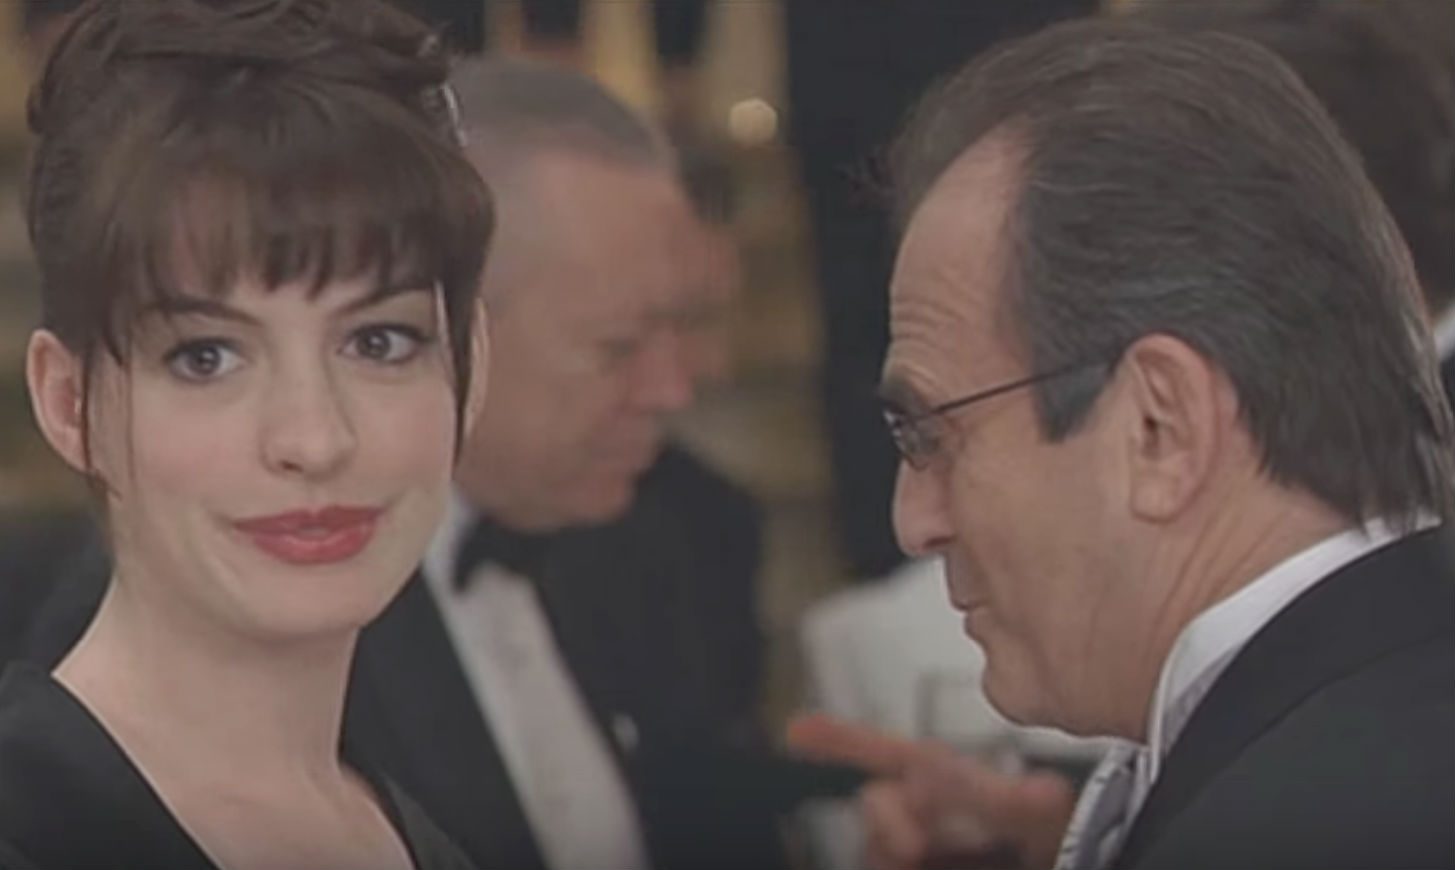 WATCH: Deleted scene from ‘The Devil Wears Prada’ shows a different Miranda Priestly